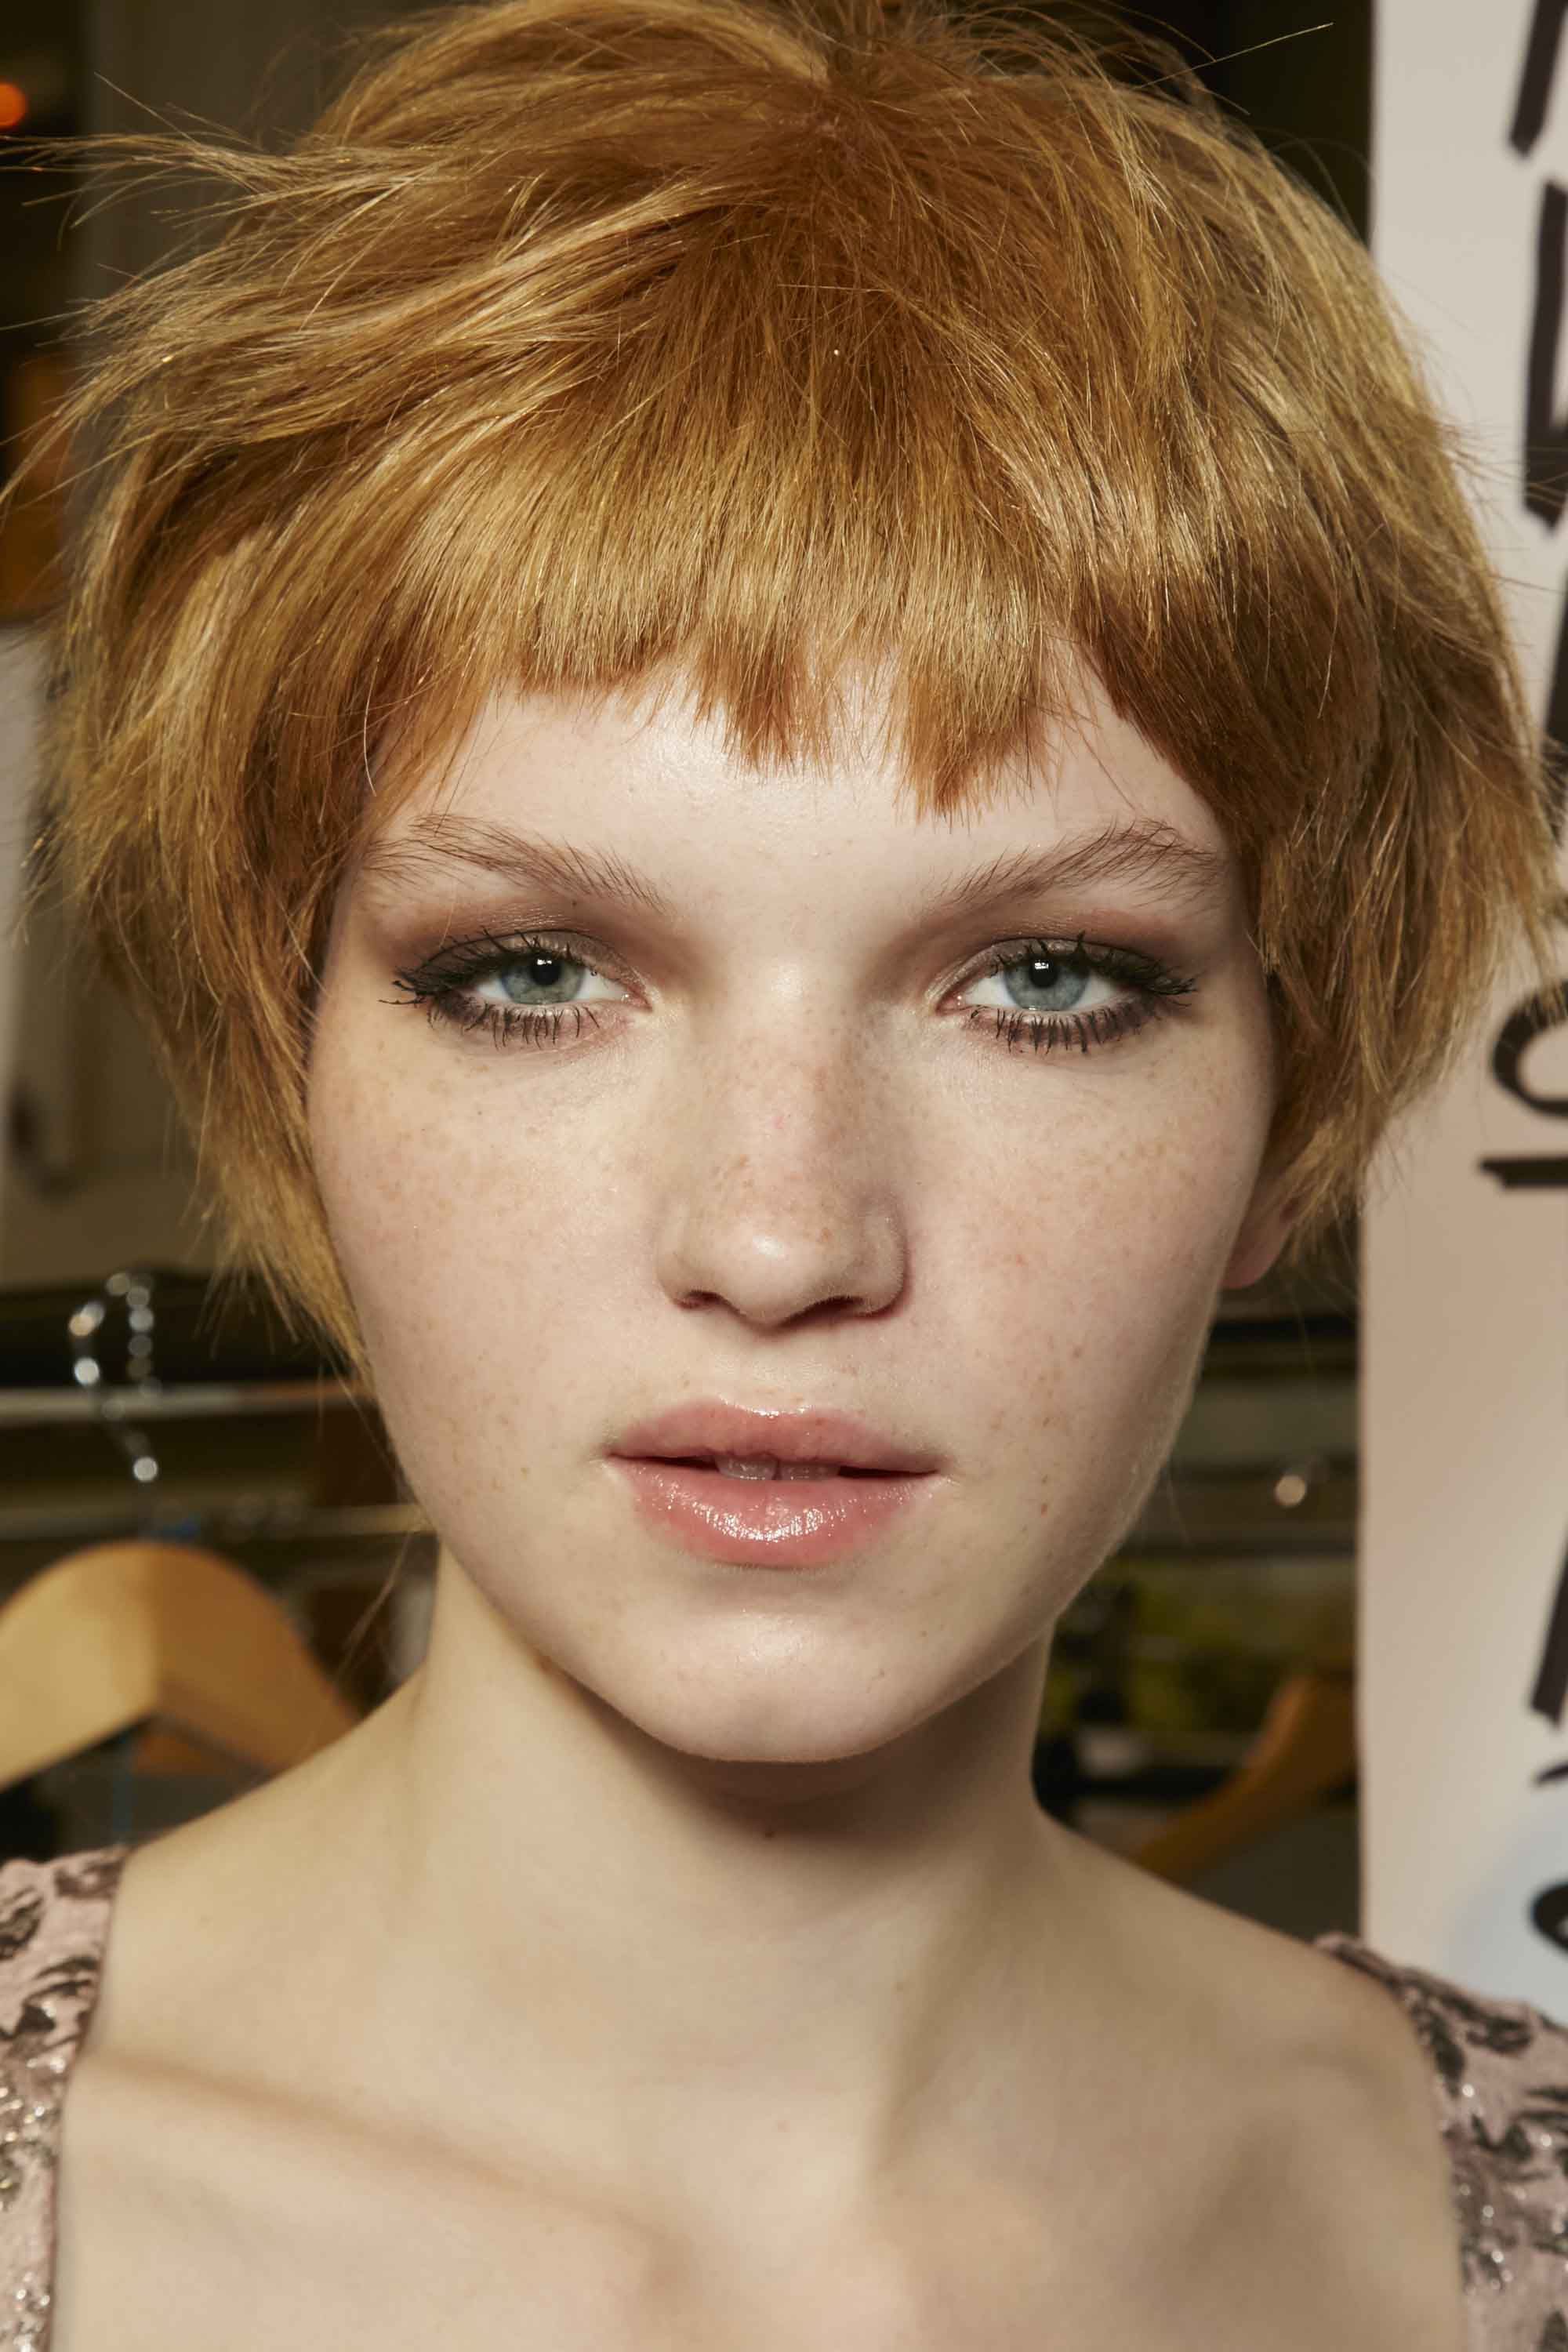 5 Cool Ways To Wear Short Bangs – Plus Need To Know Styling Tips Pertaining To Short Haircuts With Bangs (View 4 of 25)